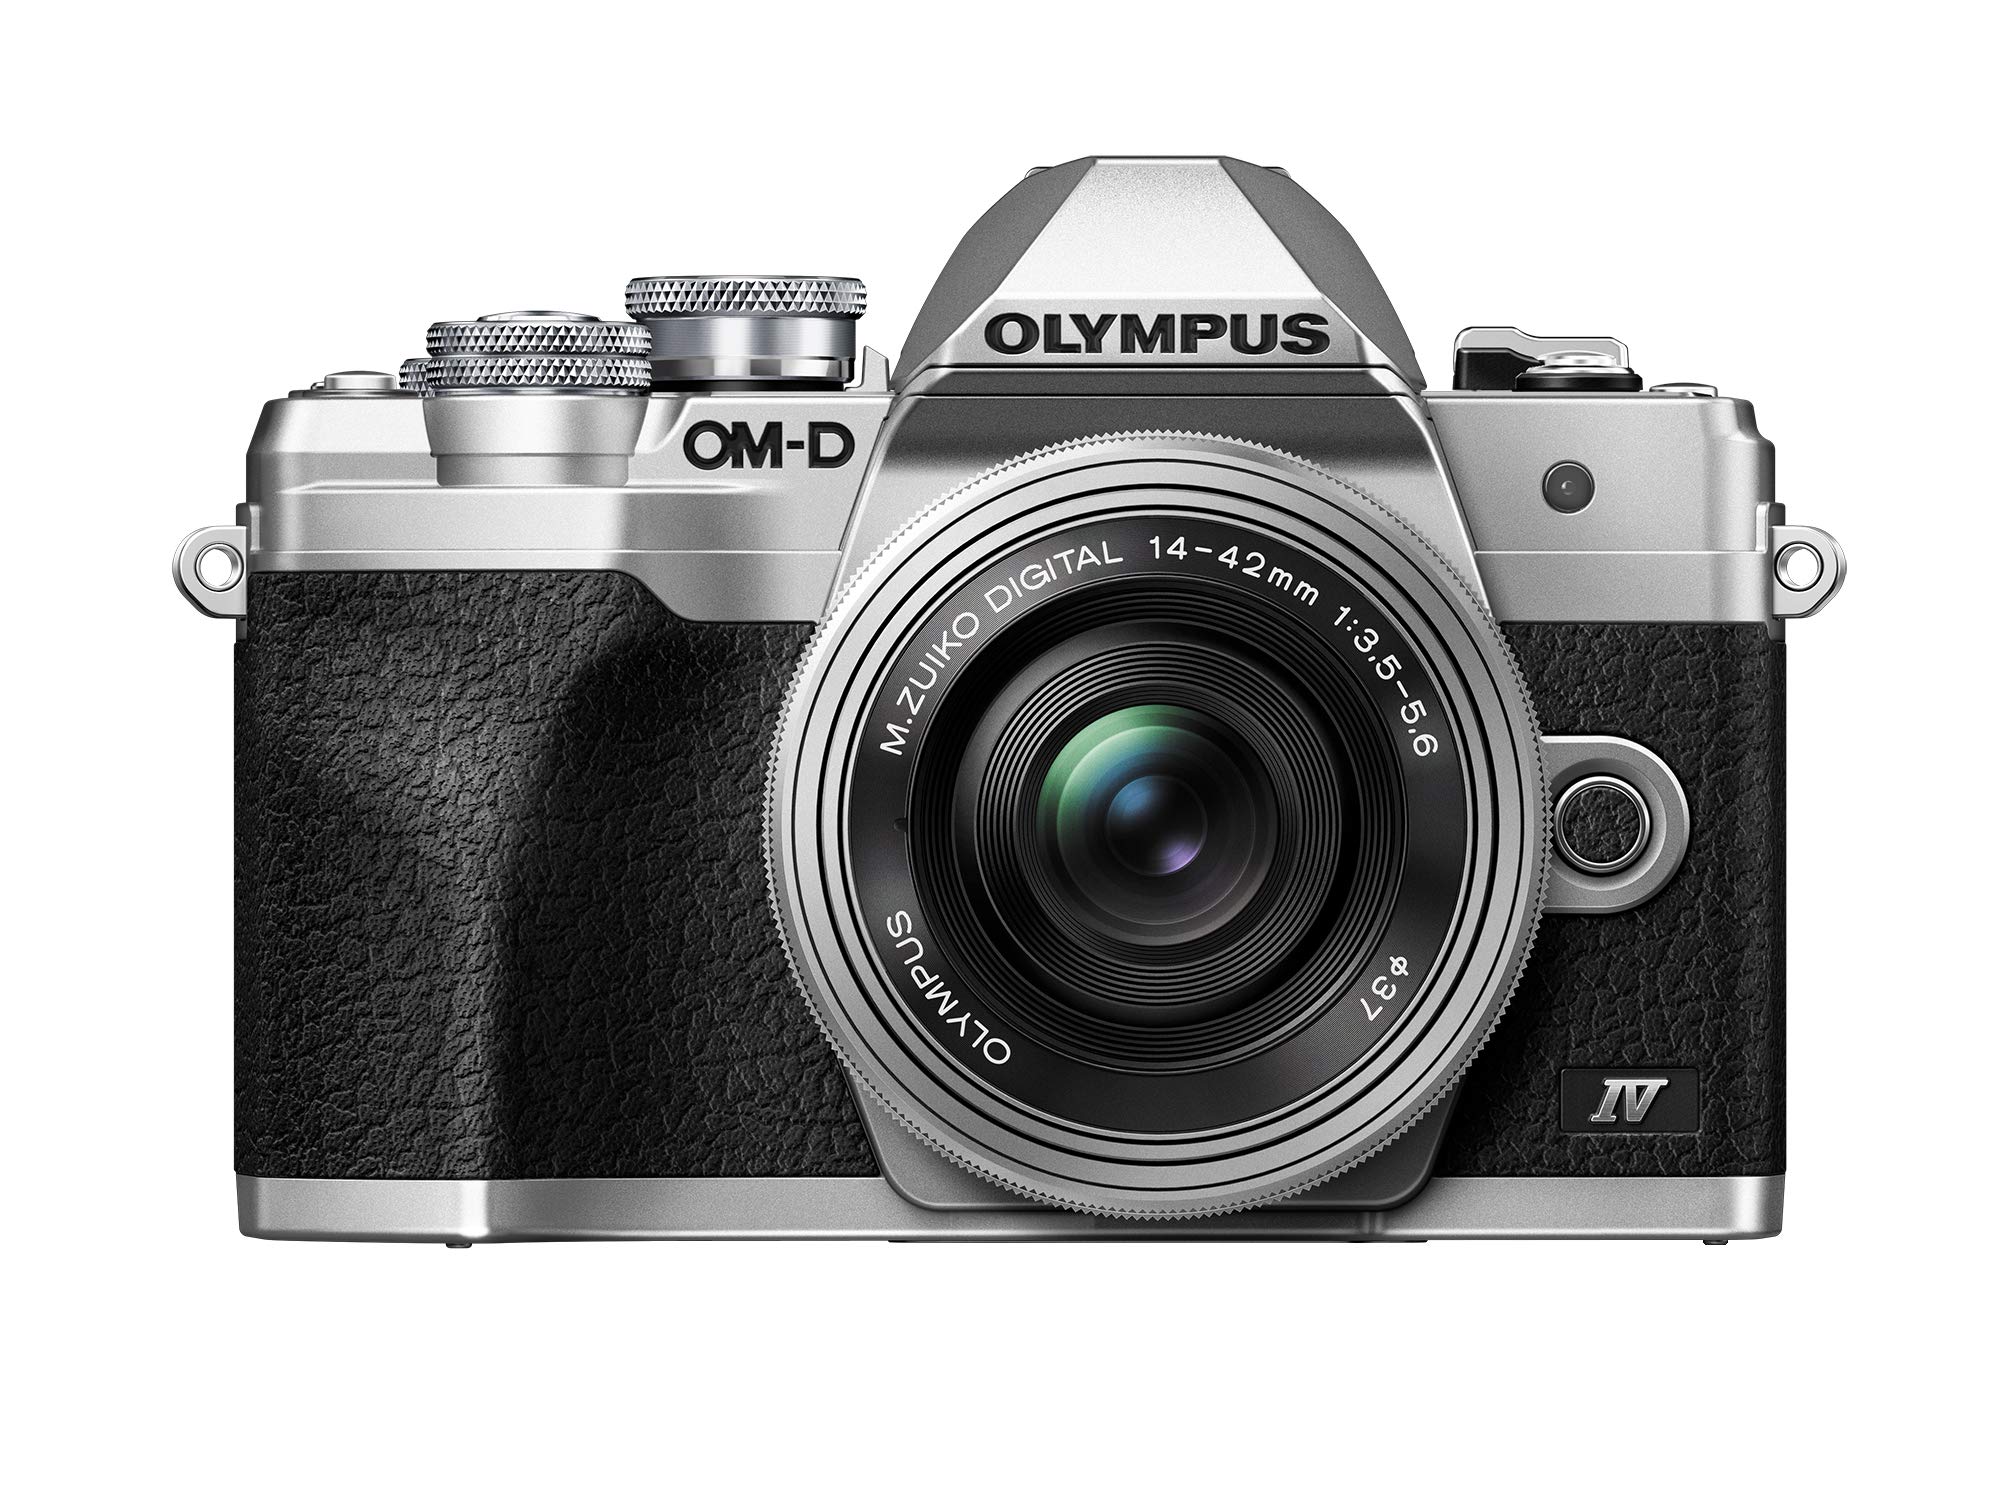 Olympus OM-D E-M10 Mark IV: Up to 24% Off